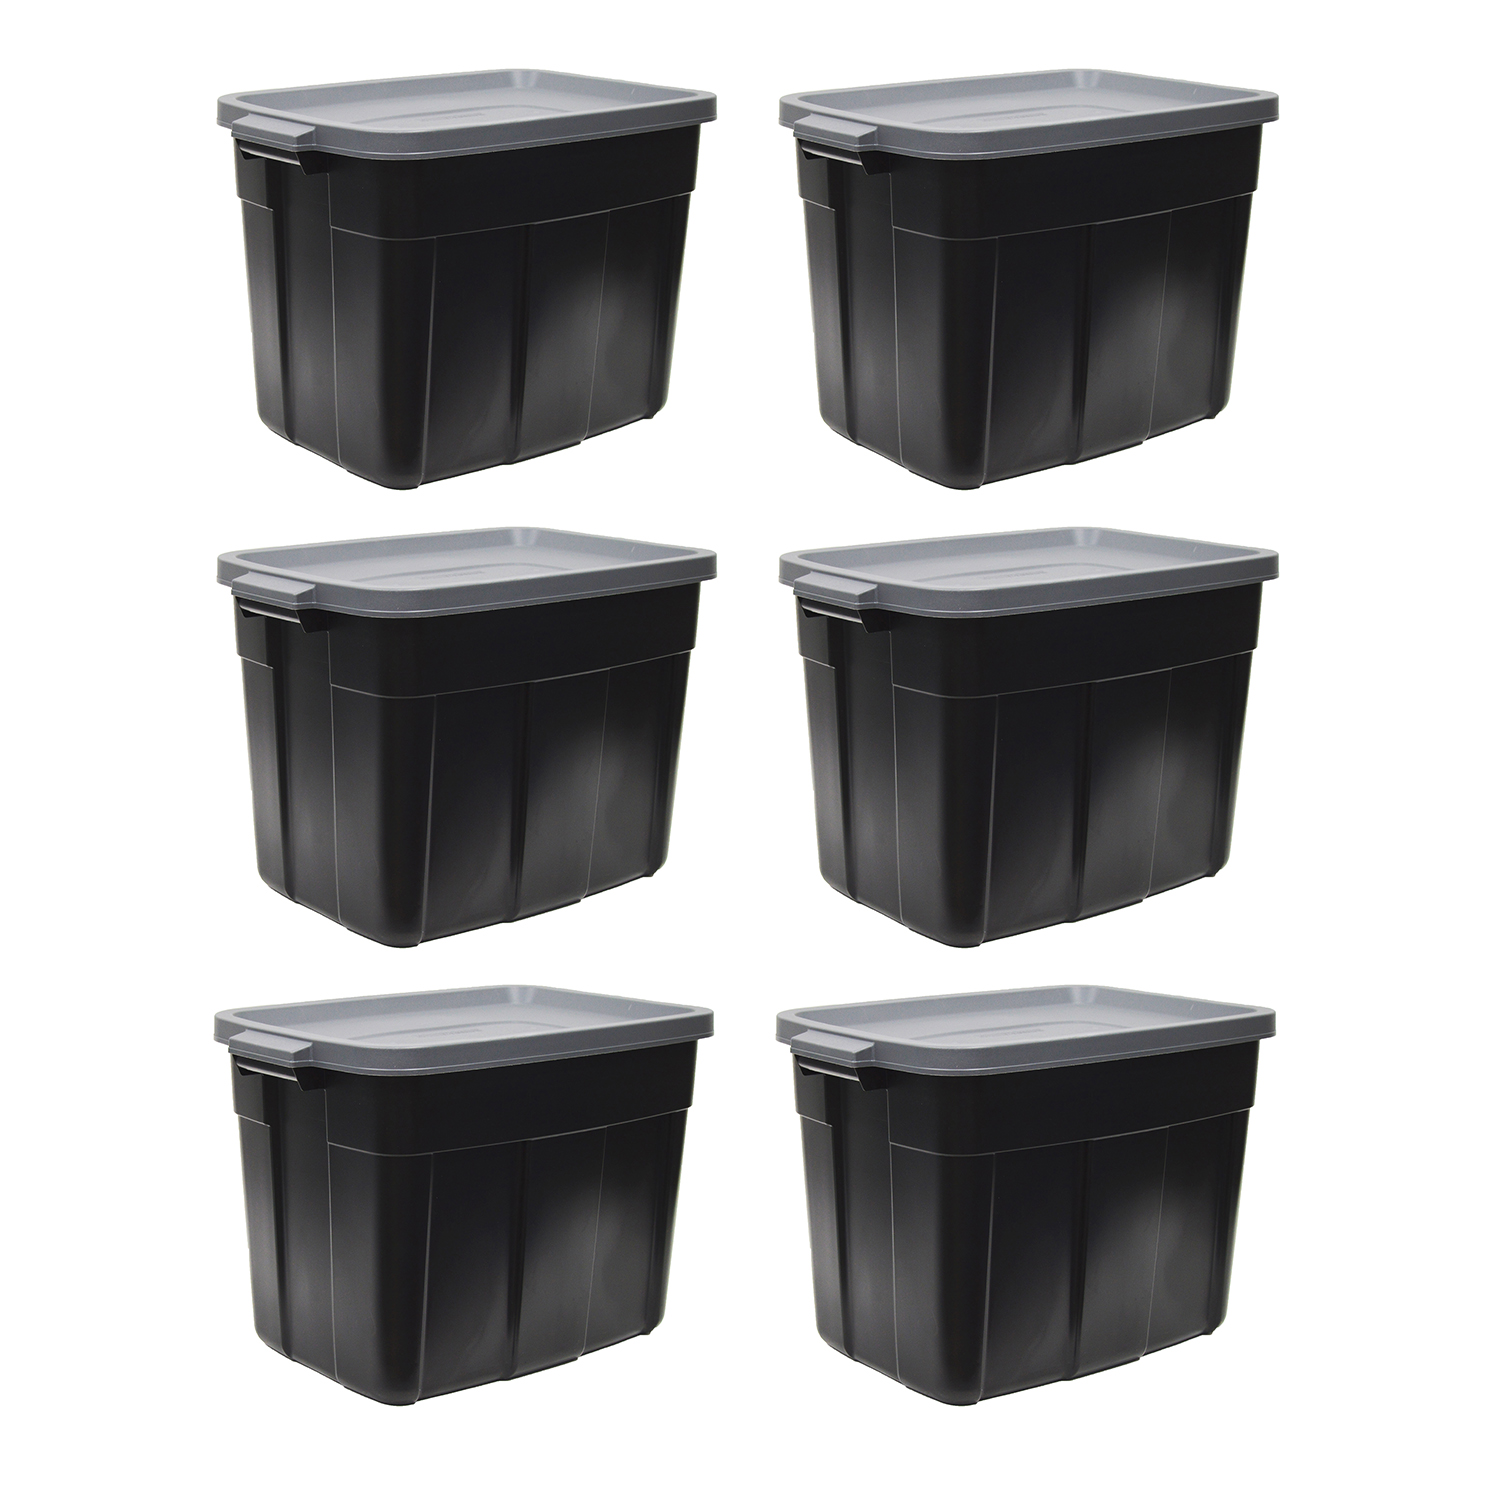 Rubbermaid Roughneck Tote 18 Gallon Storage Bin Container, Black (6 Pack) - image 1 of 6